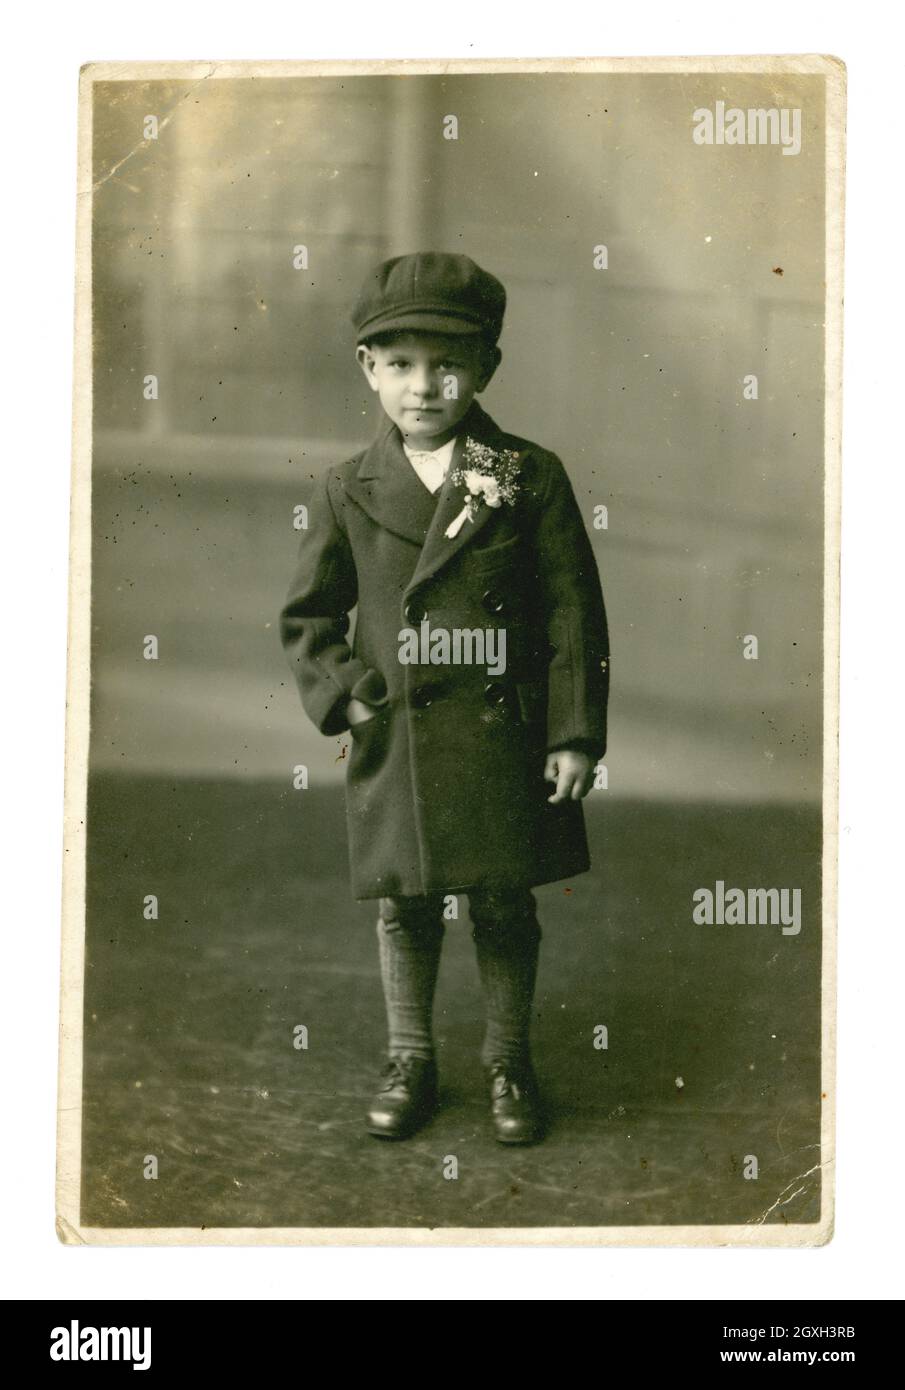 Original early 1940's postcard studio portrait of cute serious looking young lad wearing a smart long jacket, with buttonhole flowers on his lapel, and a flat cap. He is maybe a pageboy at a wedding, Cheriton, Folkestone, Kent, U.K. dated July 6 1940 Stock Photo